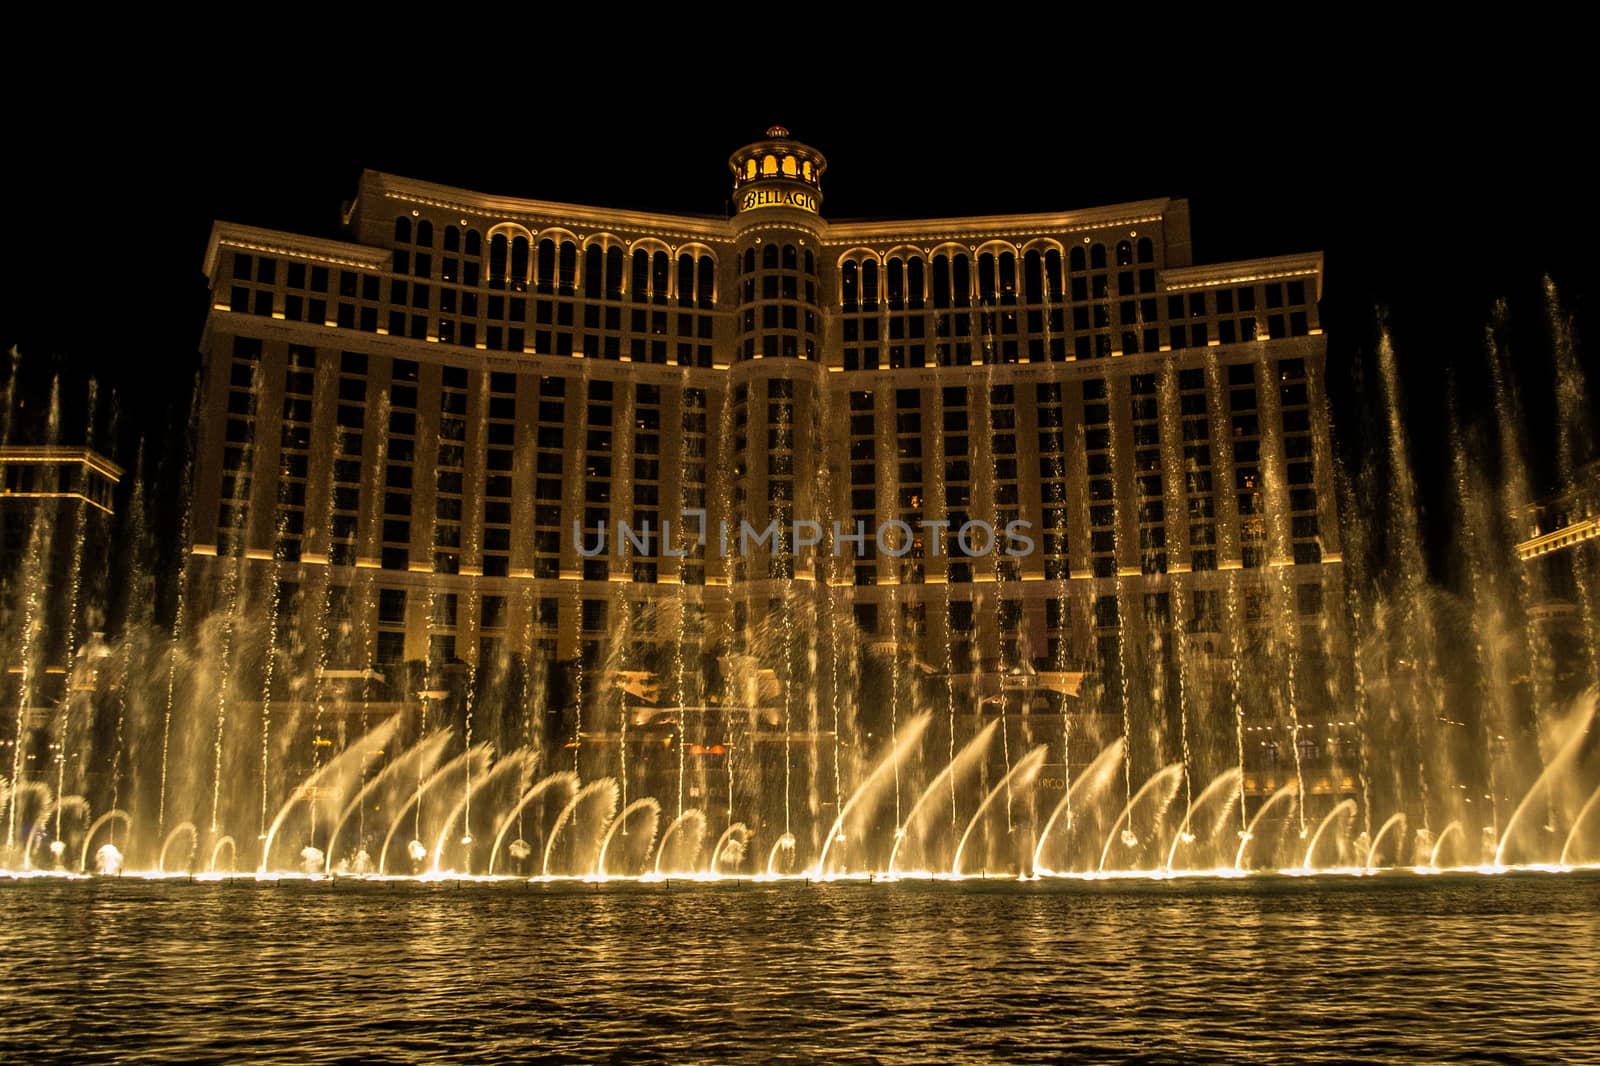 Night view on the Bellagio casino, hotel and resort in Las Vegas, Nevada United States. by kb79